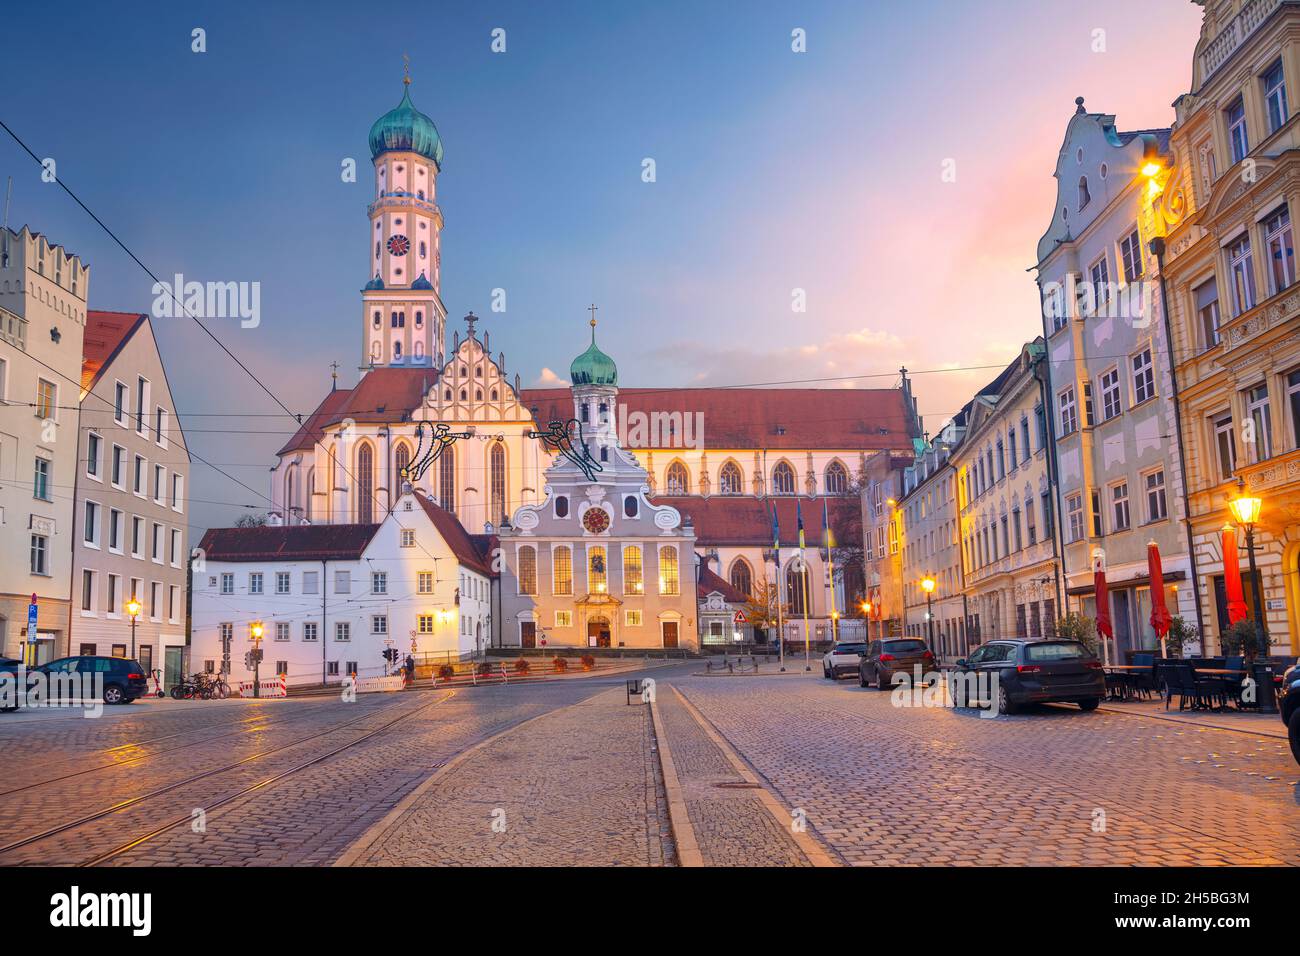 Augsburg, Germany. Cityscape image of old town street of Augsburg, Germany with the Basilica of St. Ulrich and Afra at autumn sunset. Stock Photo